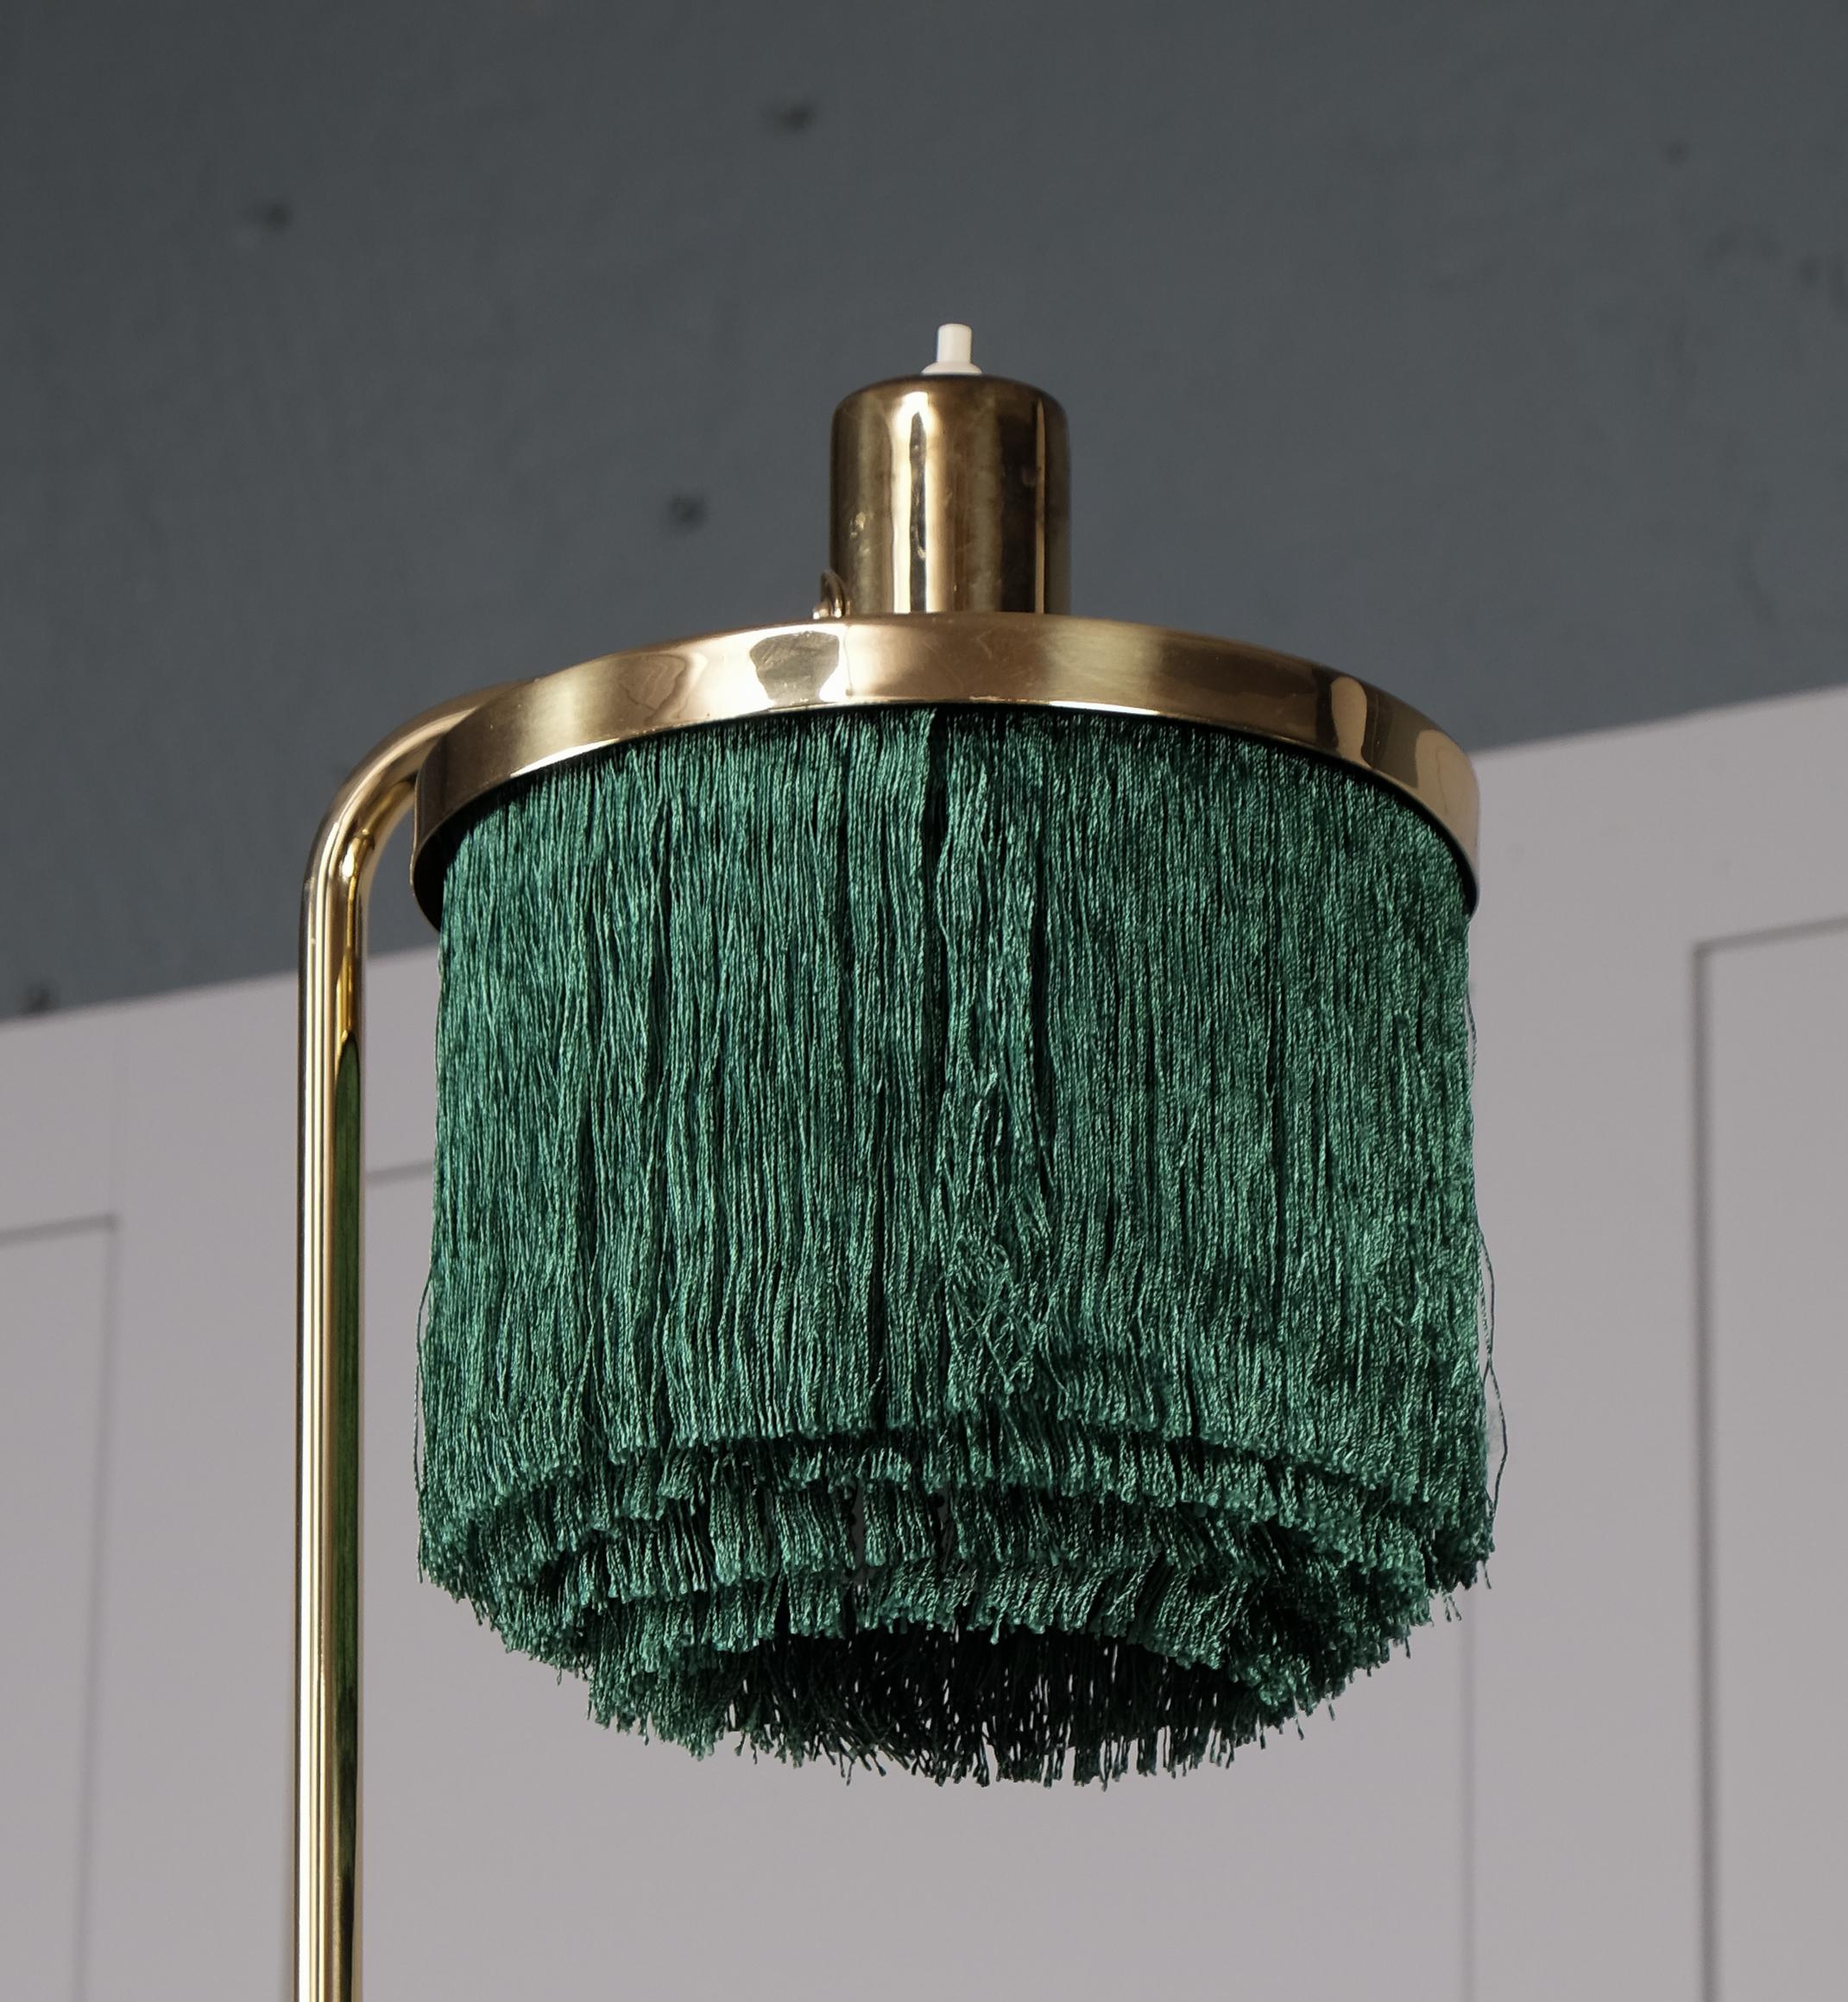 Hans-Agne Jakobsson Model B-140 Brass Table Lamp, 1960s In Good Condition For Sale In Stockholm, SE